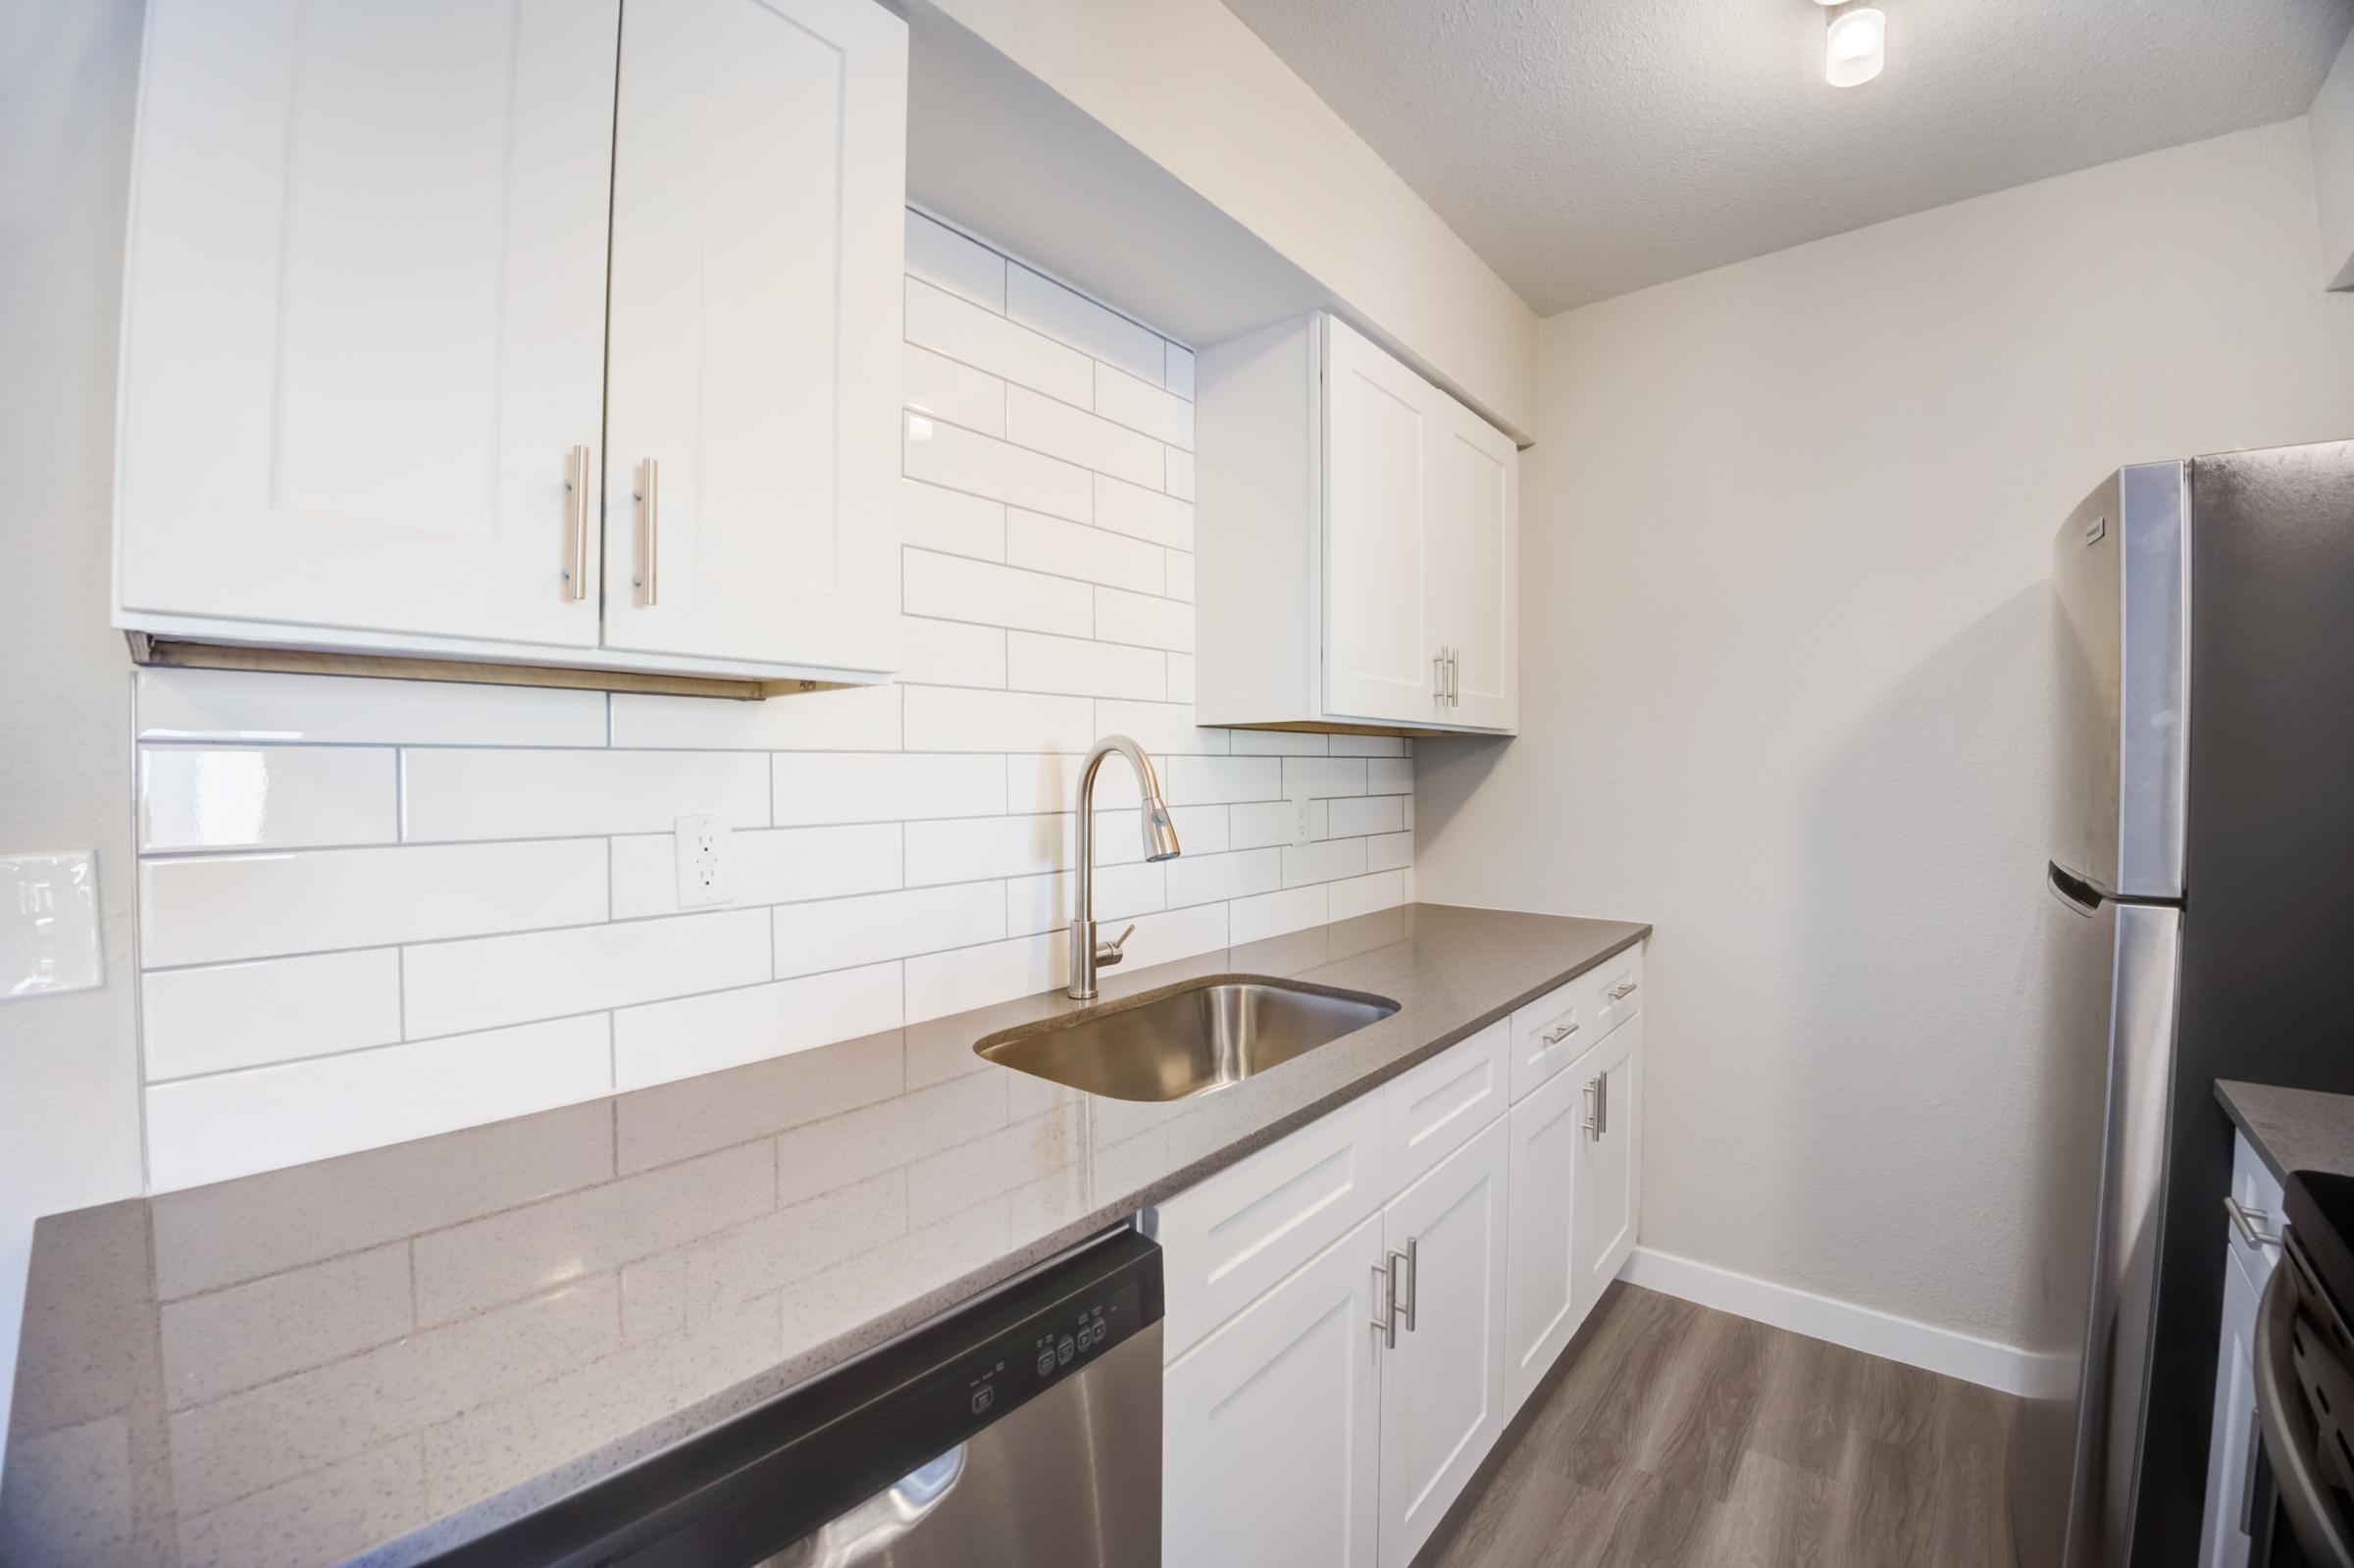 An apartment kitchen at Rise at the Meadows with a white backsplash and stainless steel appliances.